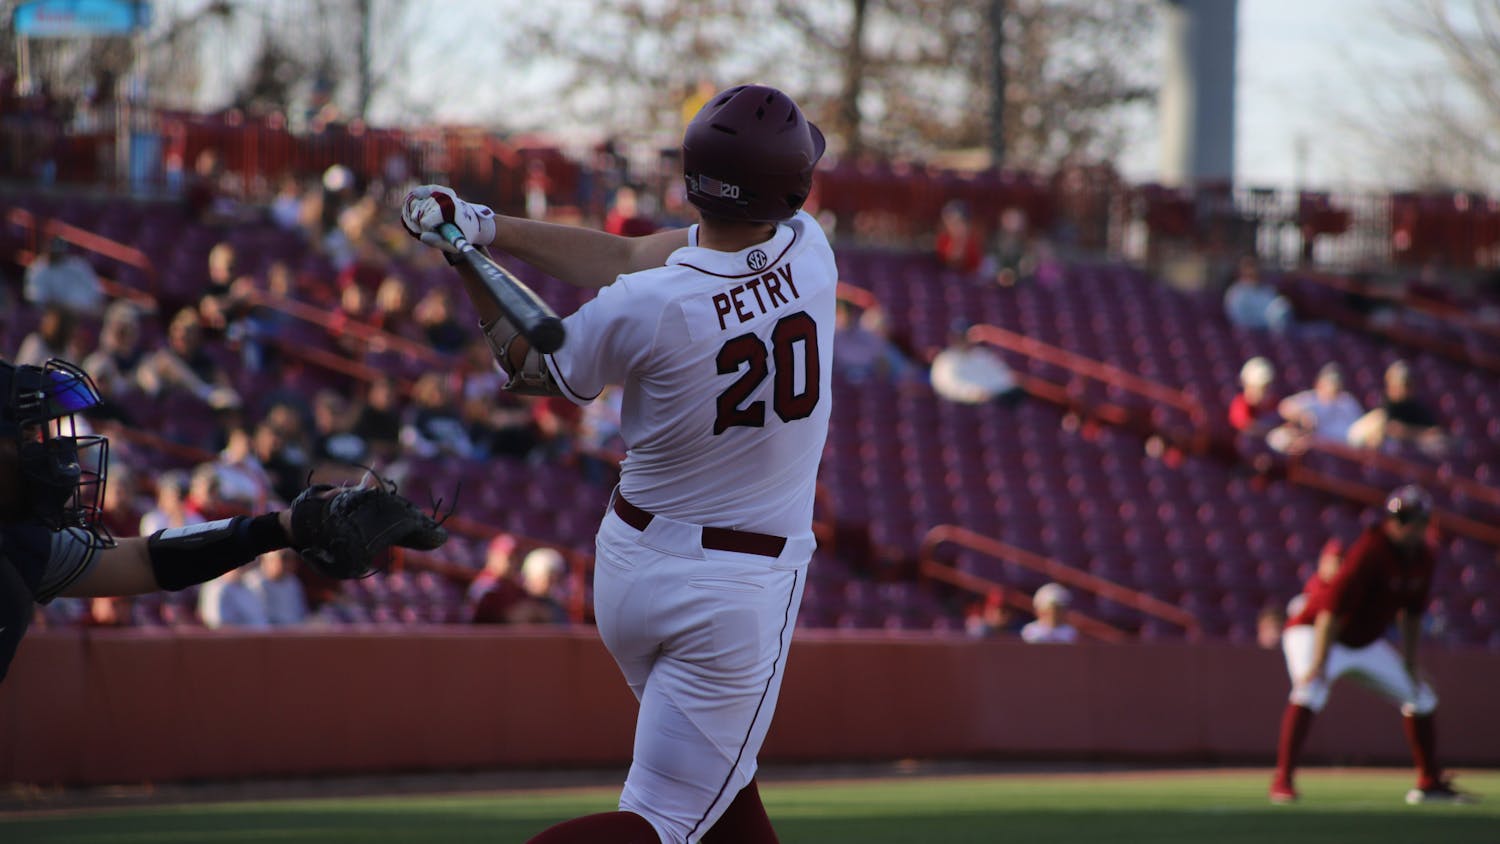 FILE—Freshman outfielder Ethan Petry up to bat for the South Carolina Gamecocks against Queens on Feb. 22. South Carolina secured its first shutout of the season with a 12-0 win, making this its fifth game in a row with double-digits scoring.